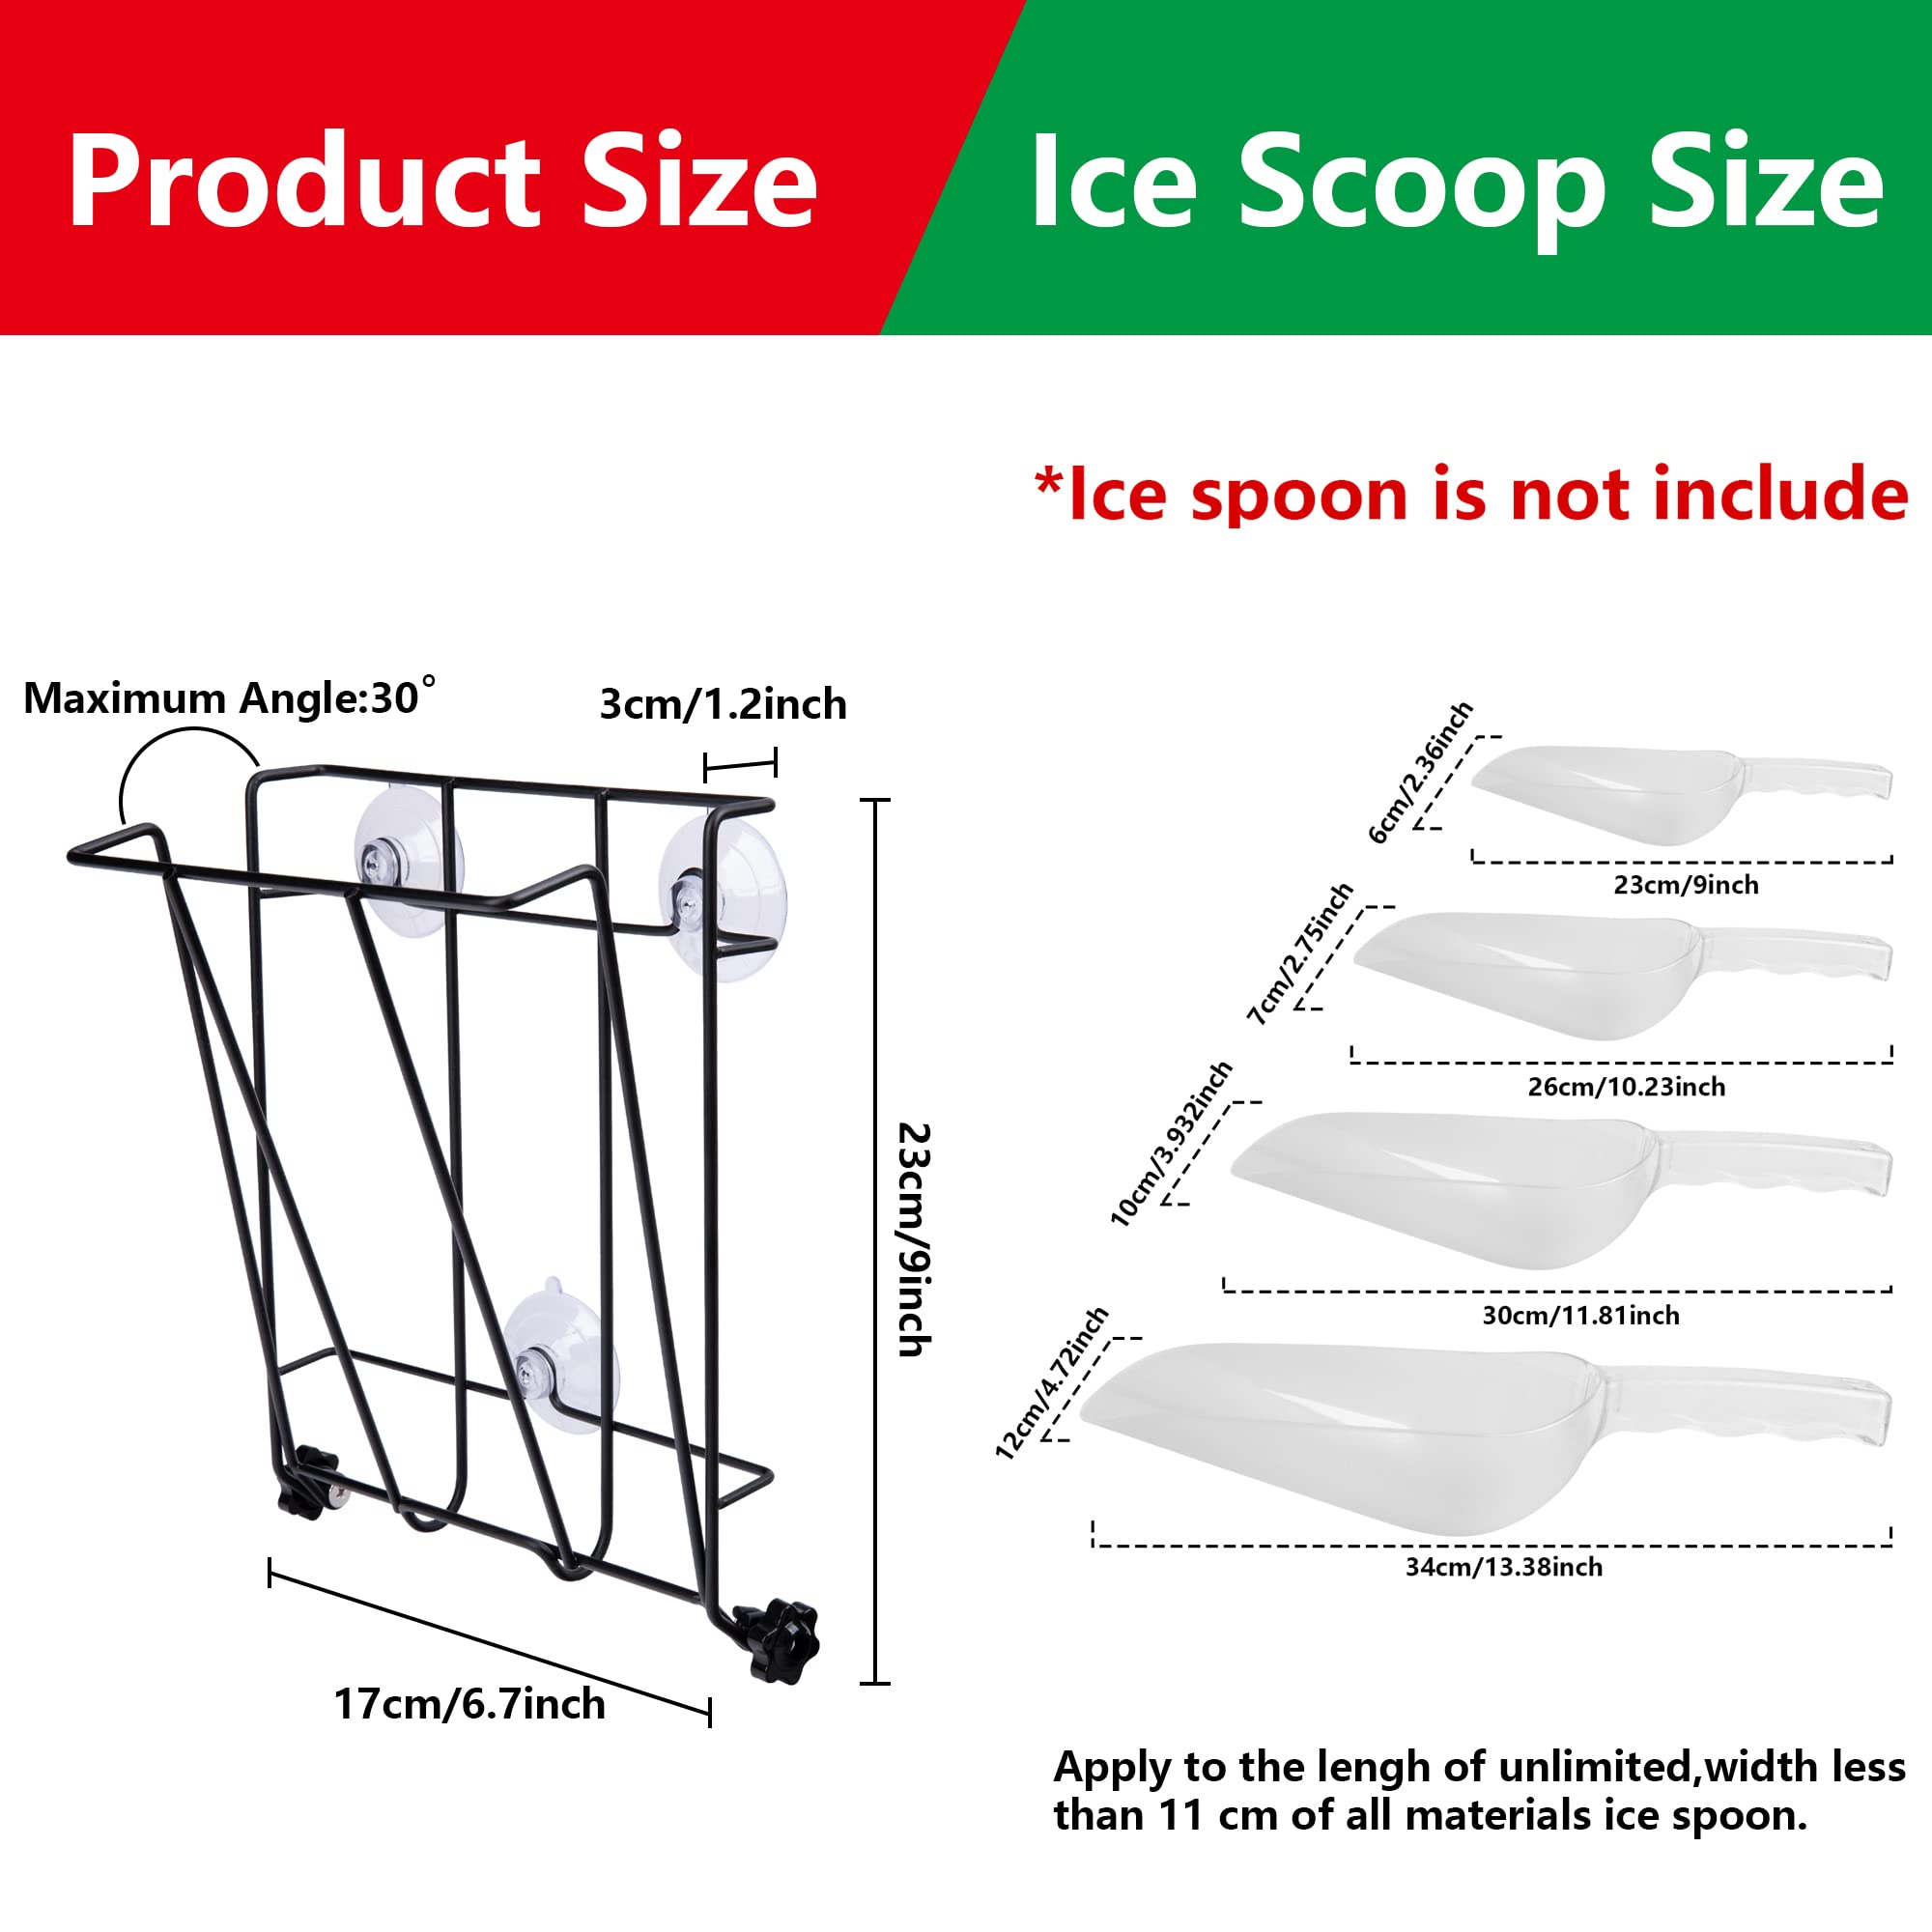 codree 9x6.7 Inch Large Ice Scoop Holder Heavy Duty-Foldable Stainless Steel Ice Scoop Holder for Counter Top Ice Maker Freezer Refrigerator Kitchen Bar Party Event, Dishwasher Safe(L)